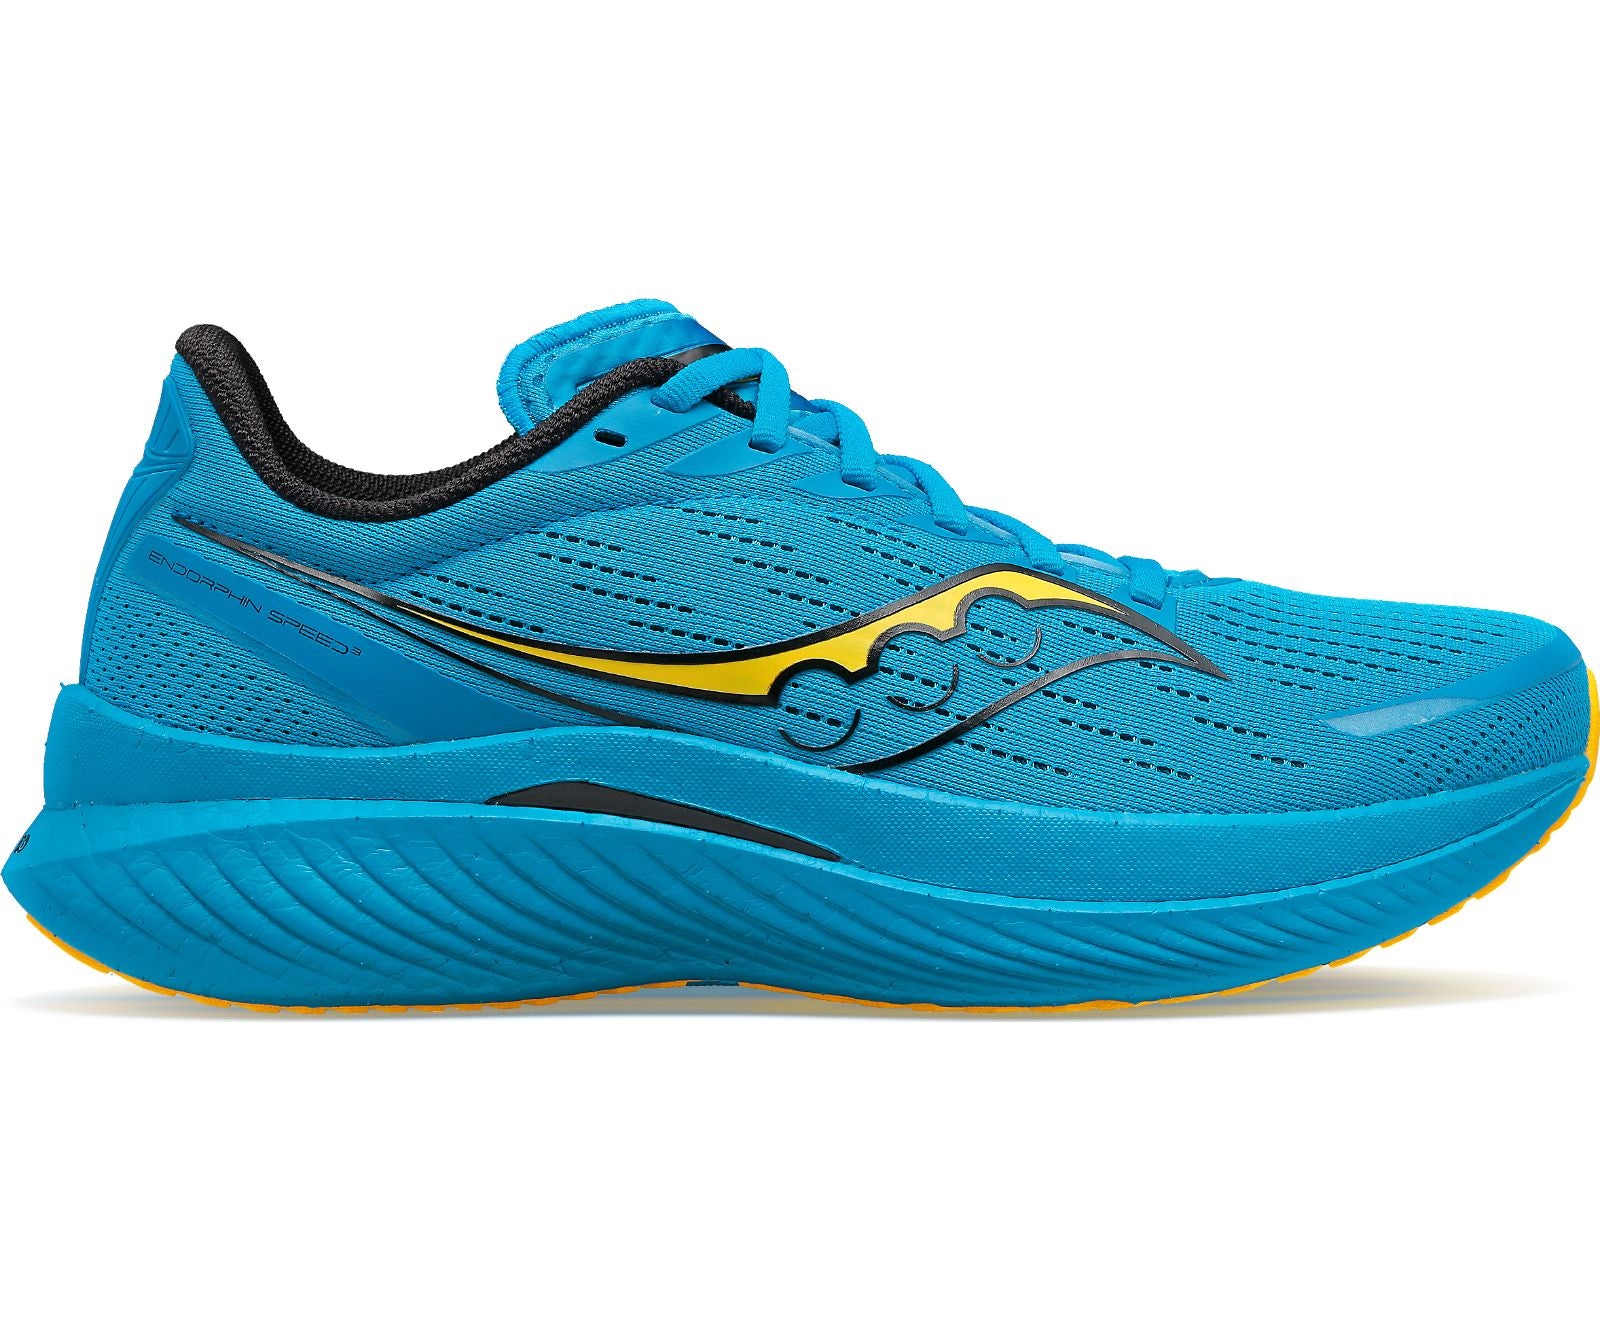 Lateral view of the Men's Endorphin Speed 3 by Saucony in the color Ocean/Vizigold